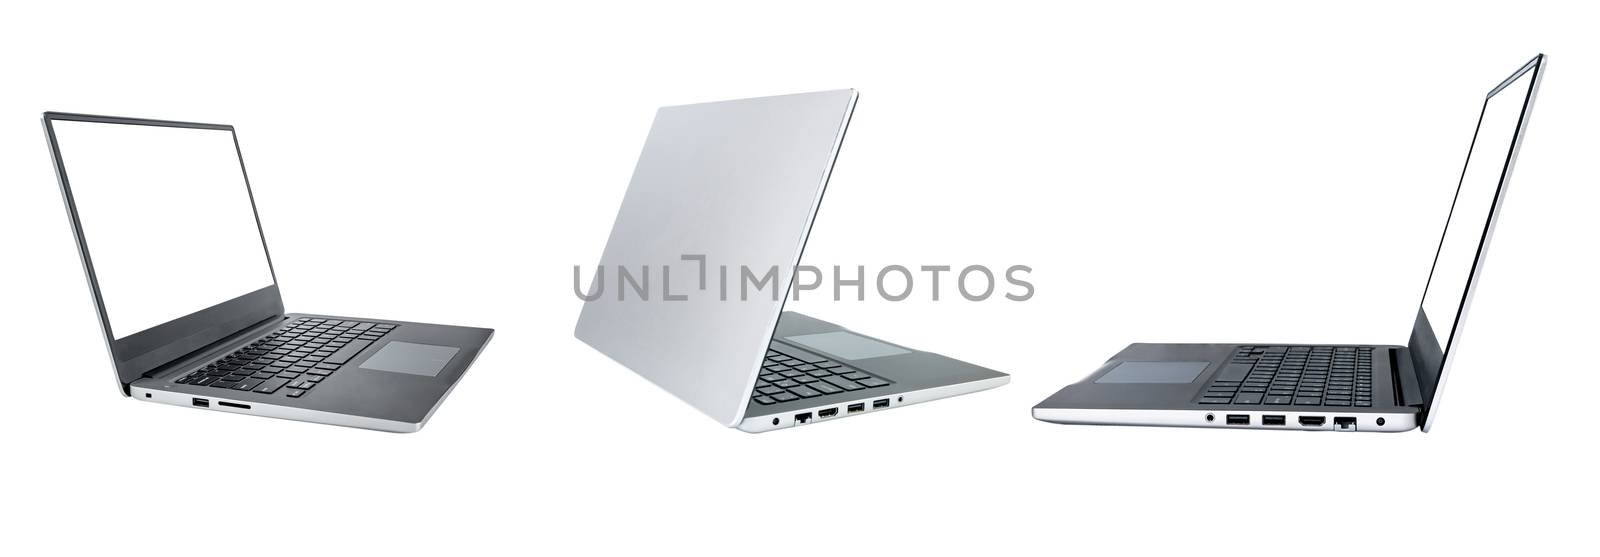 collection, Modern slim design laptop, with blank screen, Aluminum material isolated on white background. template laptop Mock up. File contains with clipping path so easy to work. by noomubon